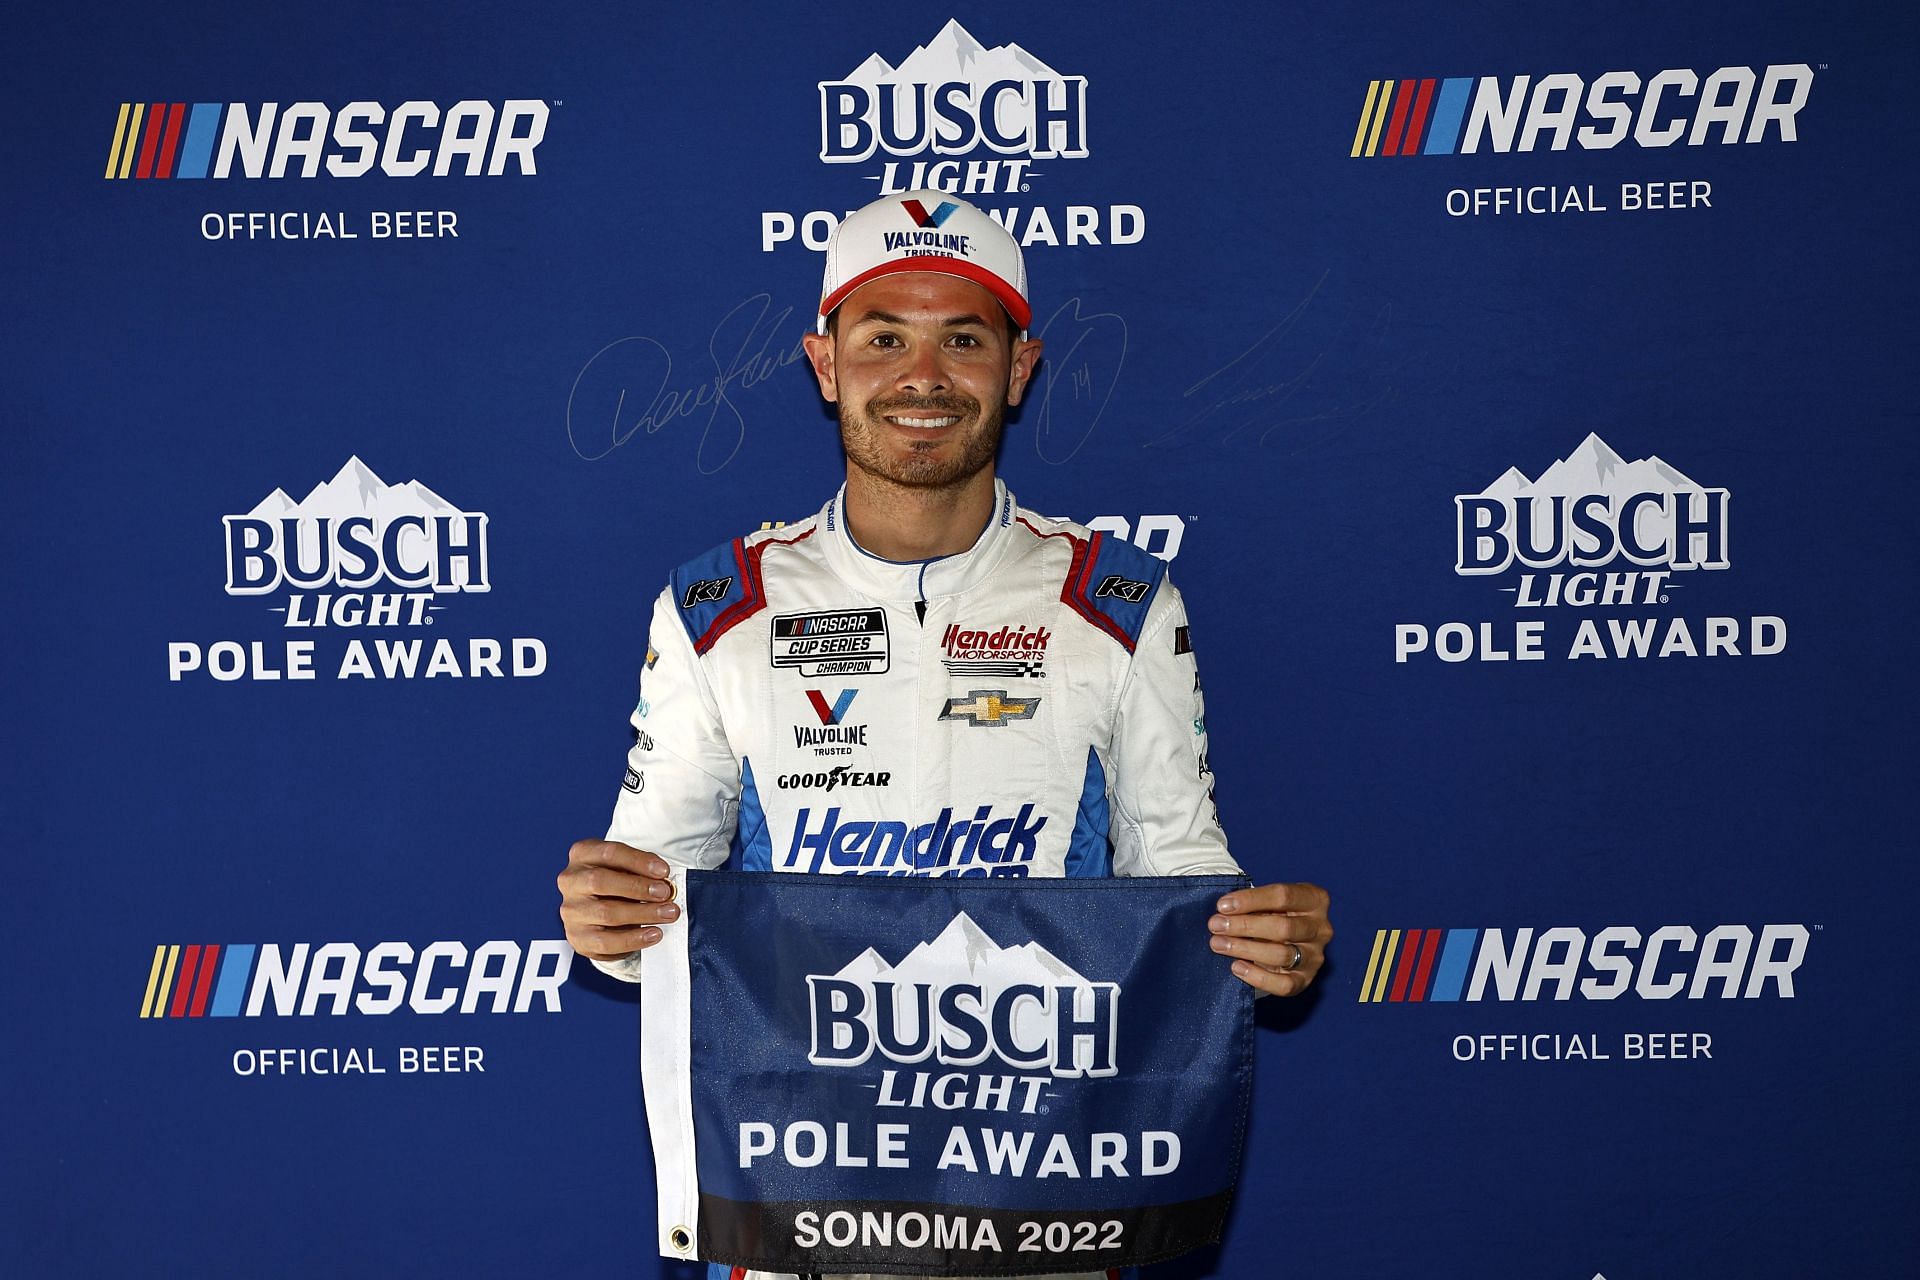 Kyle Larson, poses for photos after winning the pole award during qualifying for the NASCAR Cup Series Toyota/Save Mart 350 at Sonoma Raceway (Photo by Chris Graythen/Getty Images)